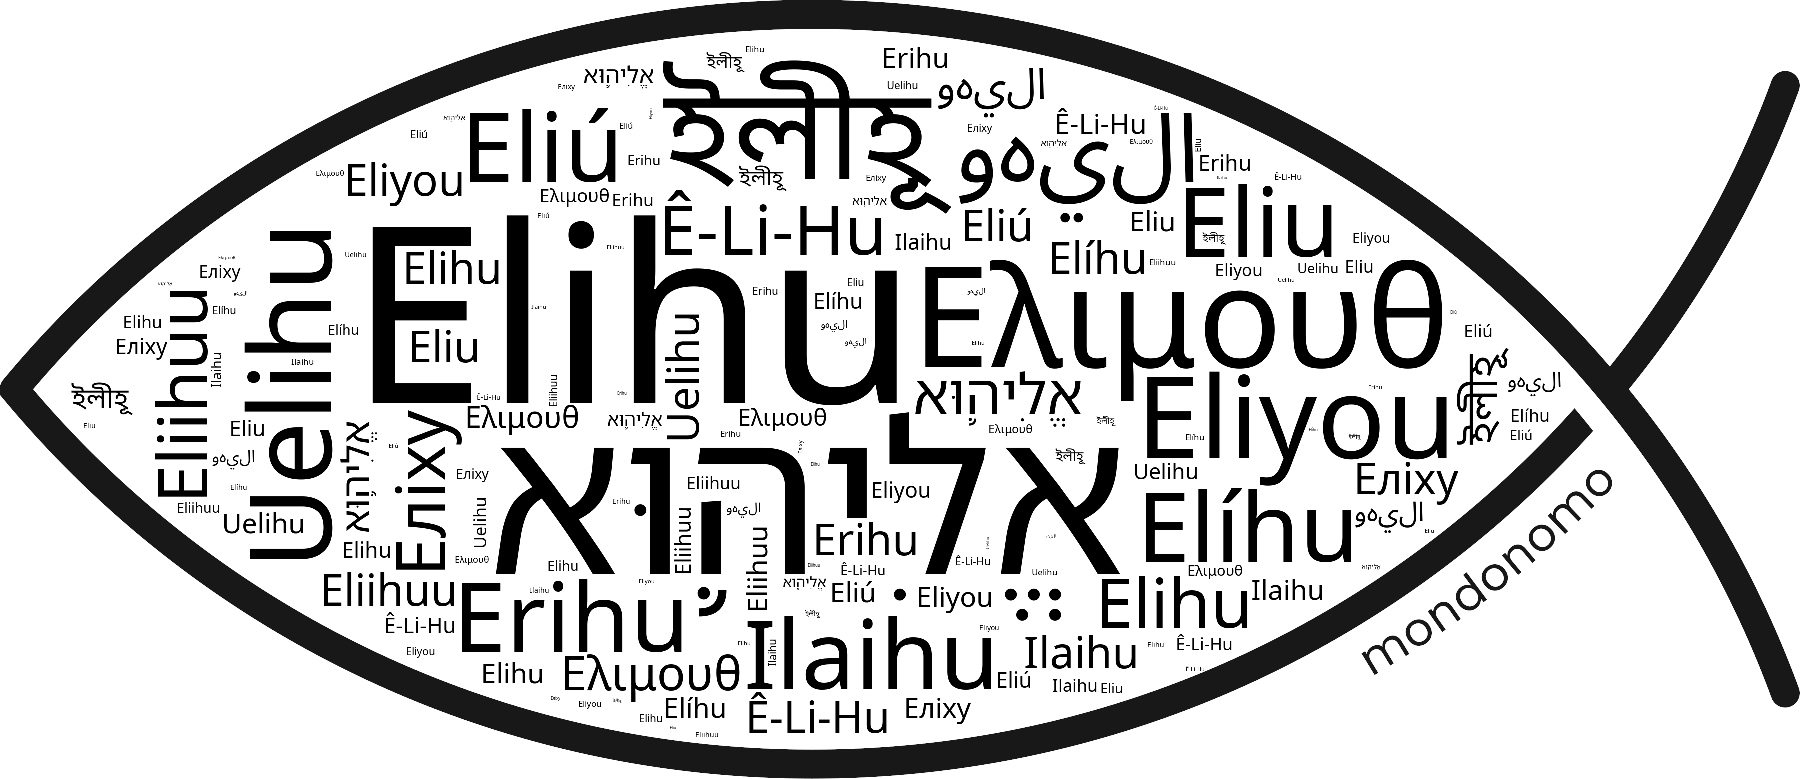 Name Elihu in the world's Bibles